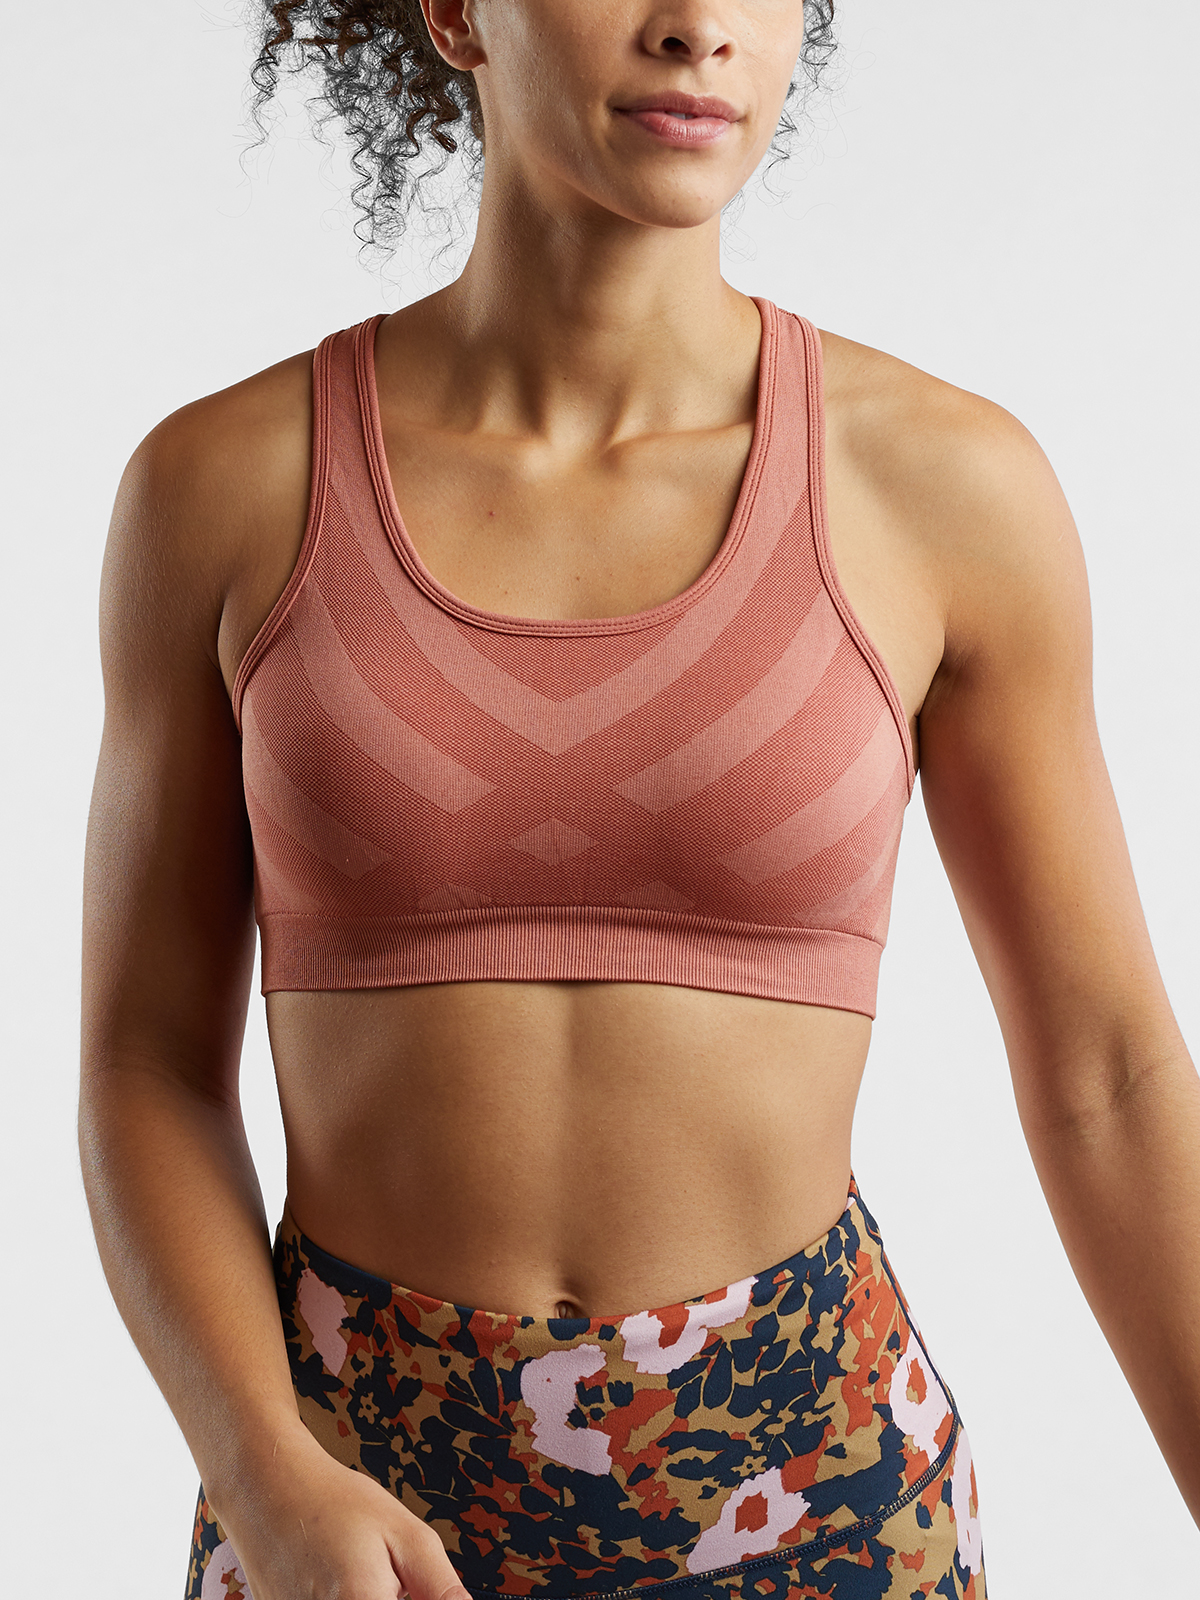 first sports bra ever made Hot Sale - OFF 53%